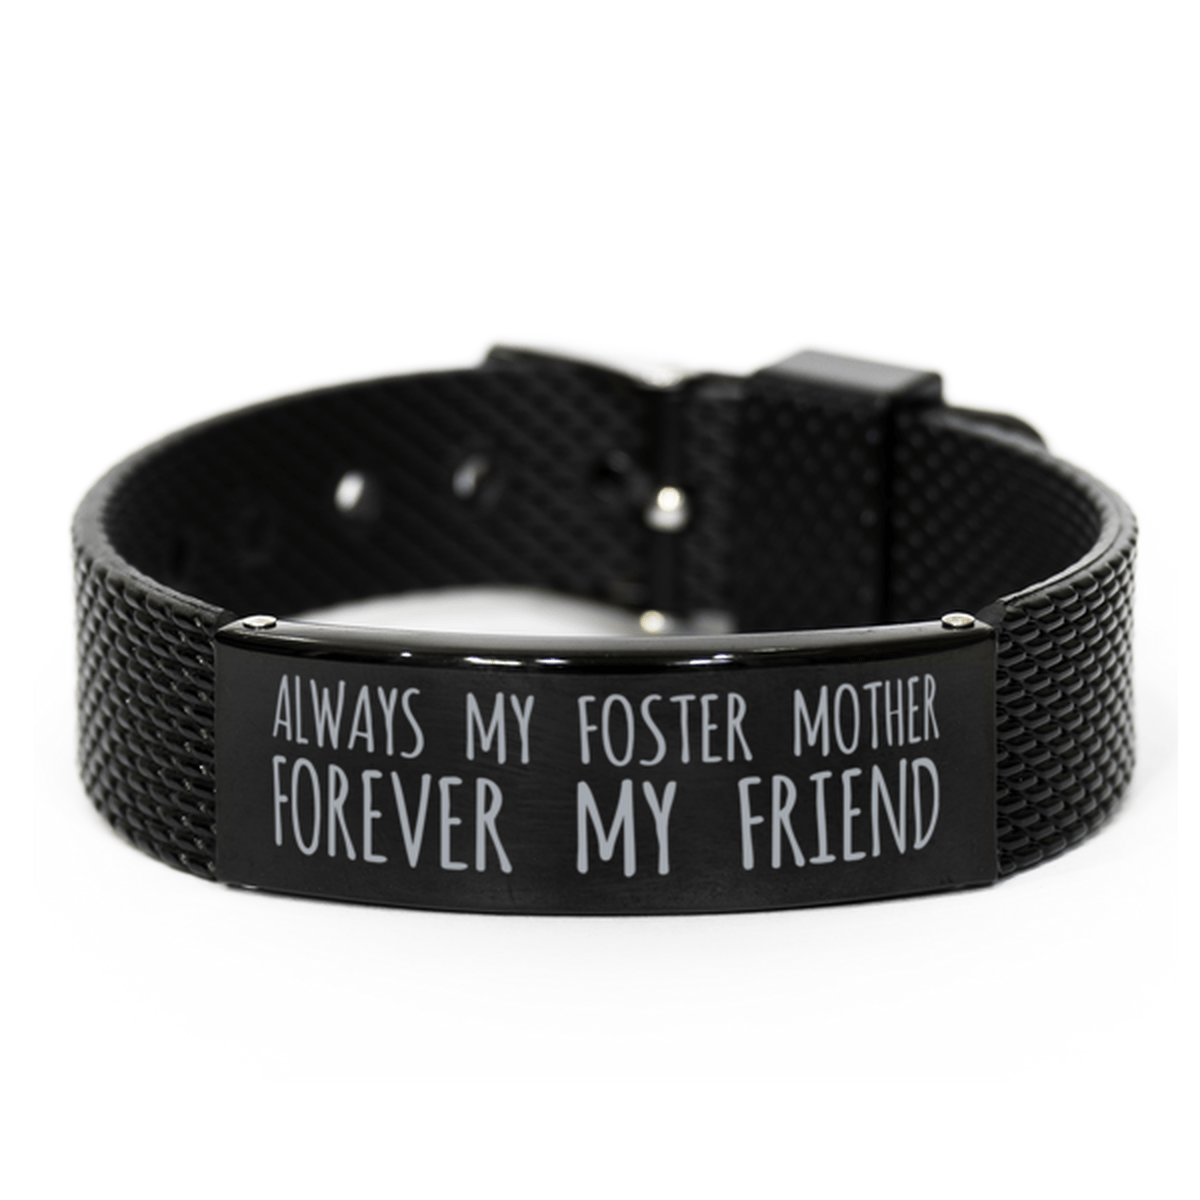 Inspirational Foster Mother Black Shark Mesh Bracelet, Always My Foster Mother Forever My Friend, Best Birthday Gifts for Family Friends